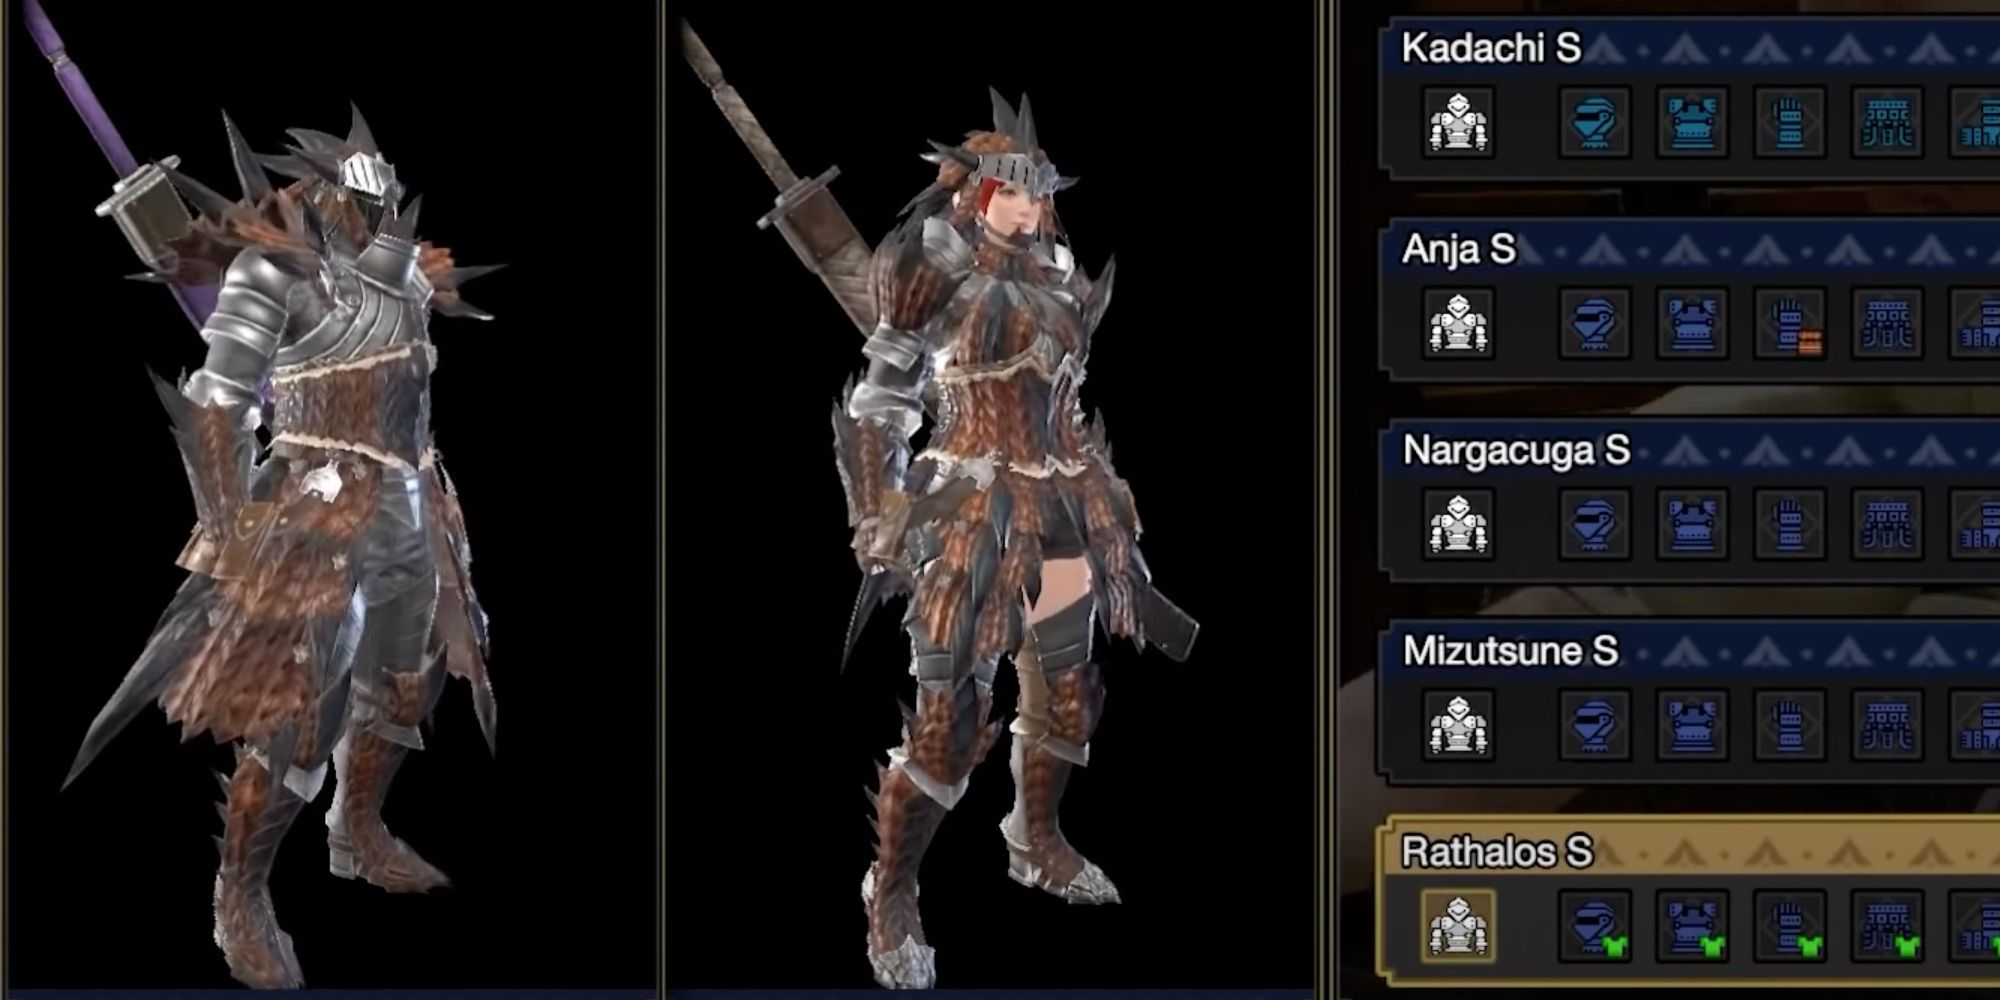 Armor selection screen showing both gendered hunters in Rathalos armor